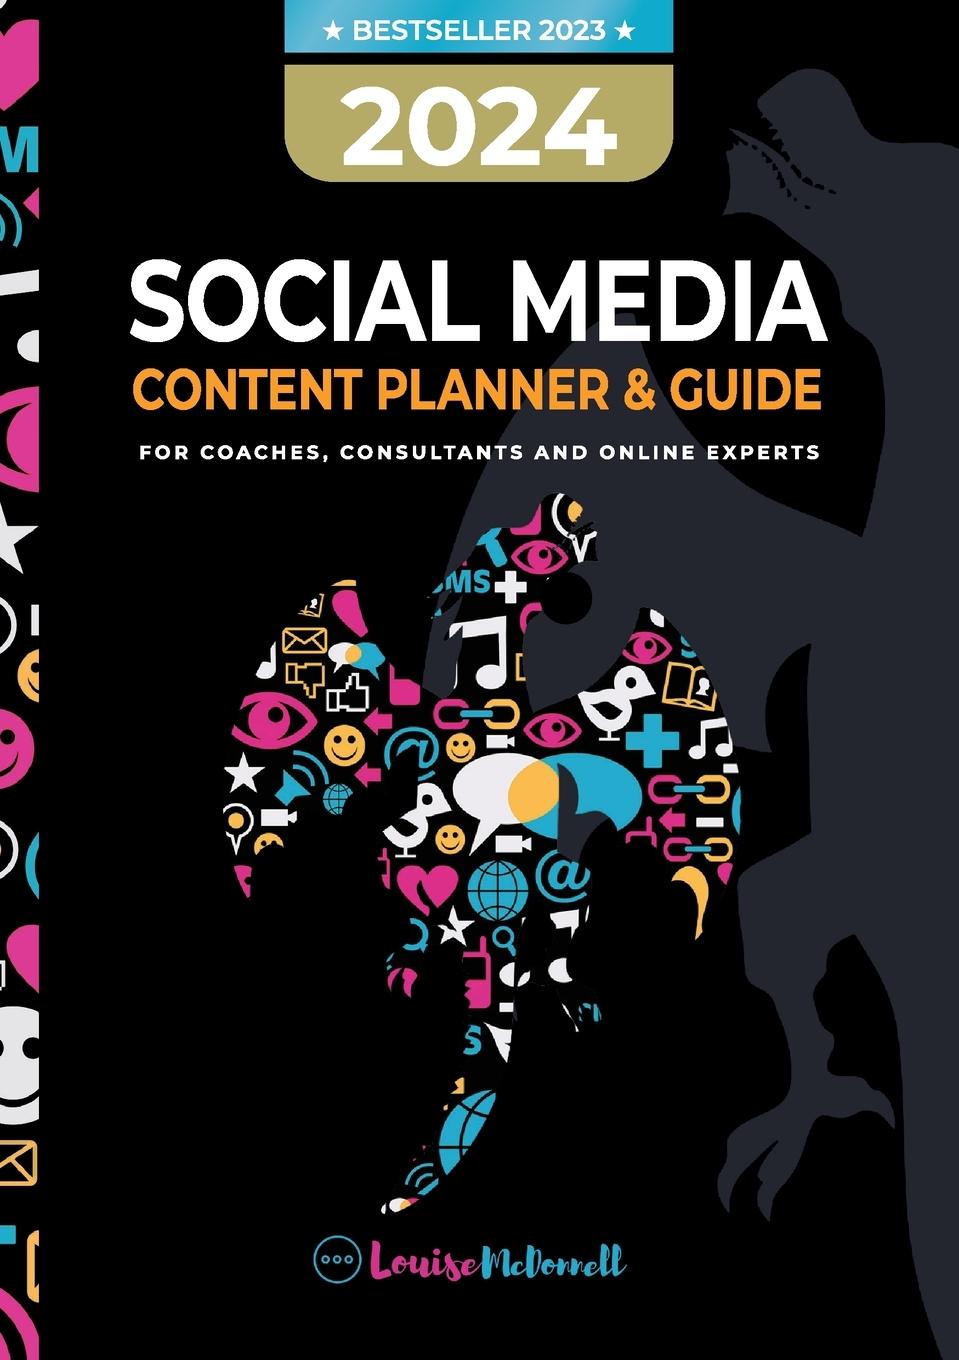 Book 2024 Social Media Content Planner & Guide for Coaches, Consultants & Online Experts 